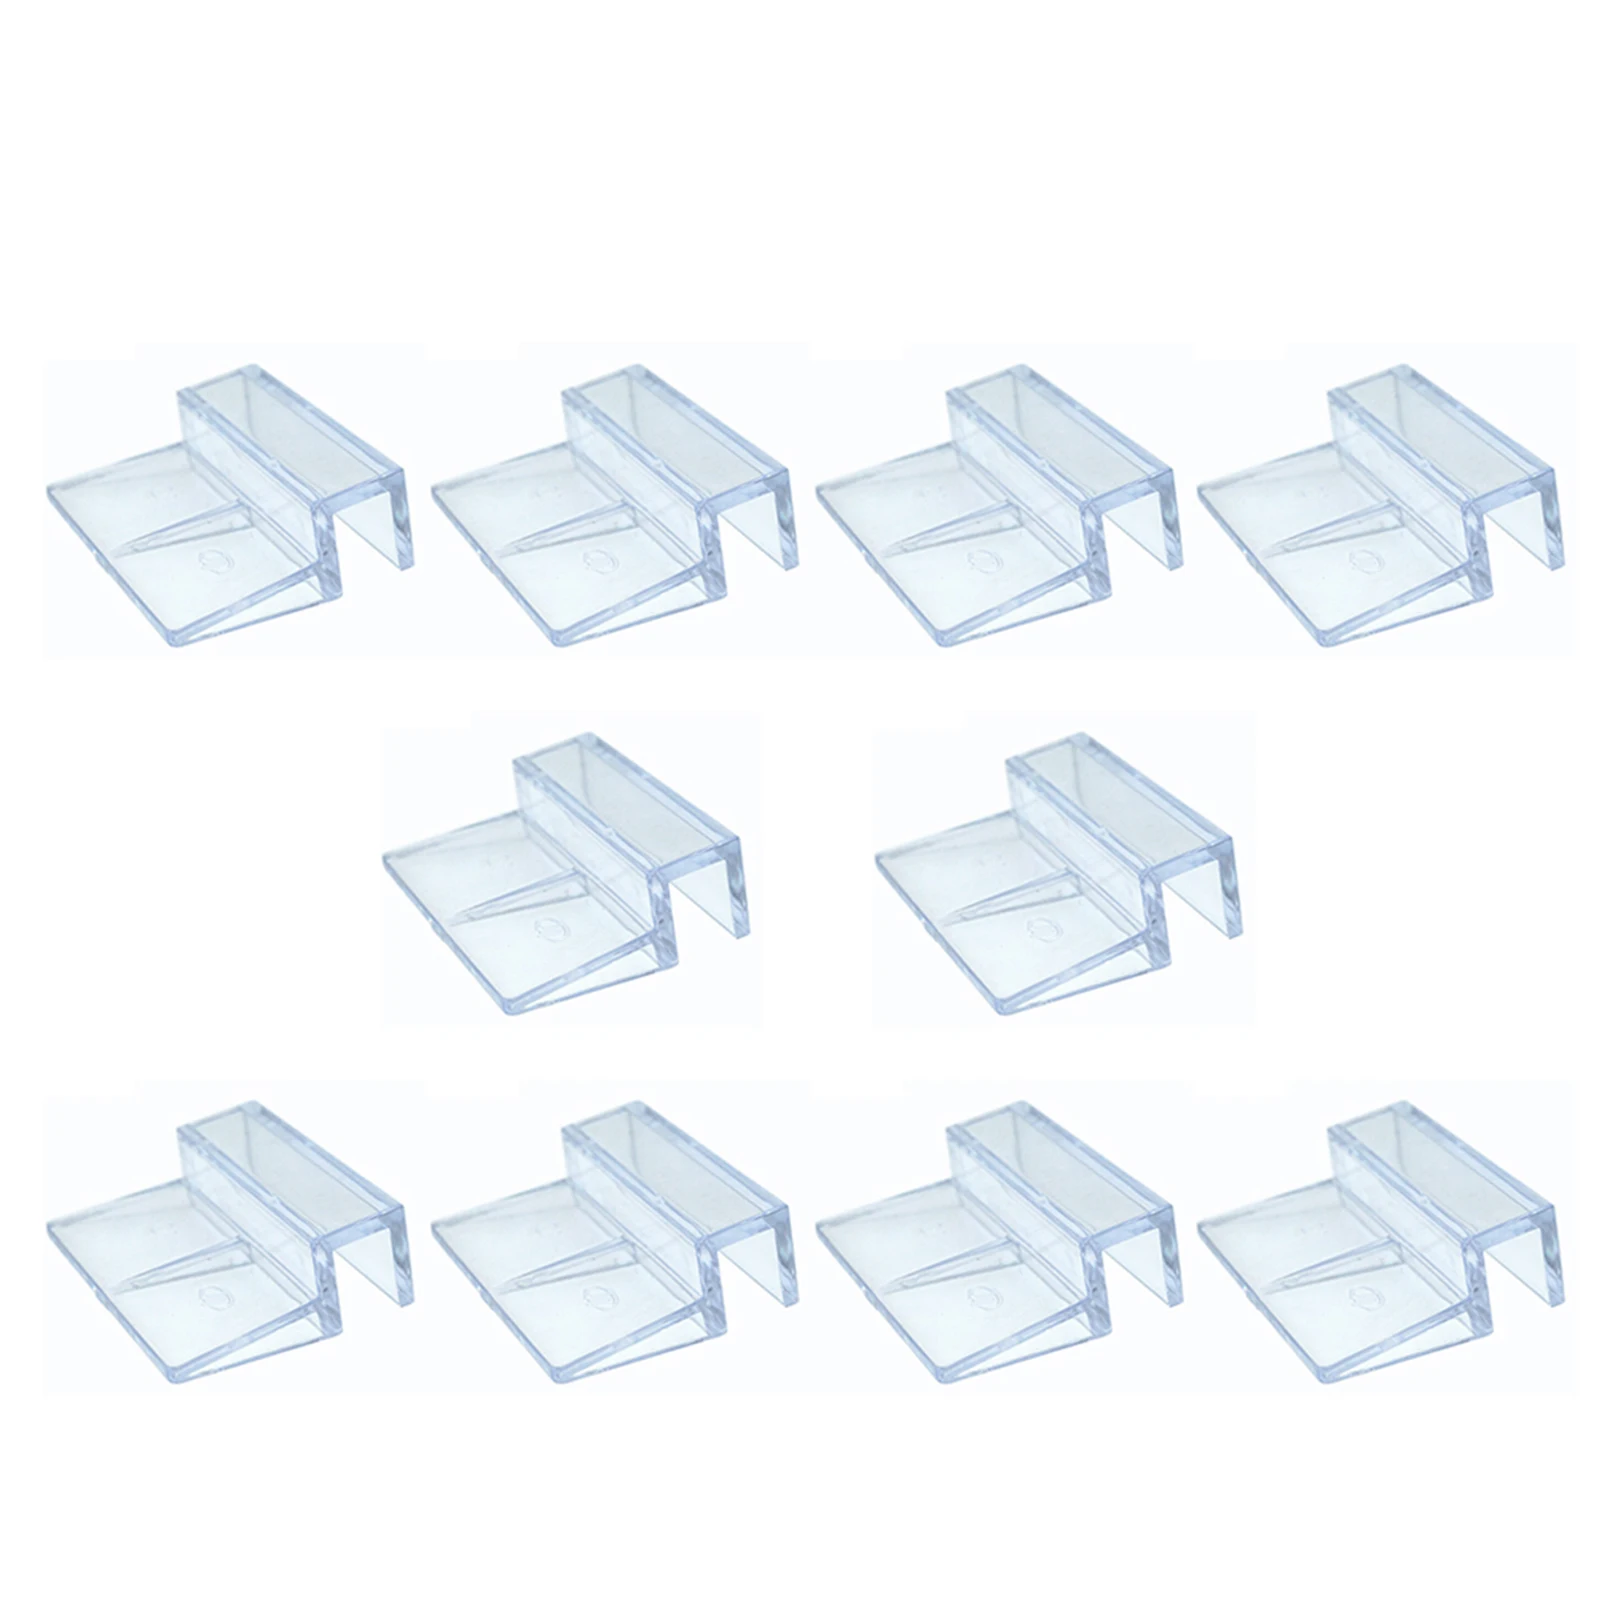 10pcs Easy Install Home 6/8/10/12mm Stand Aquarium Support Holder Glass Cover Clip Accessories Multifunctional Acrylic Fish Tank